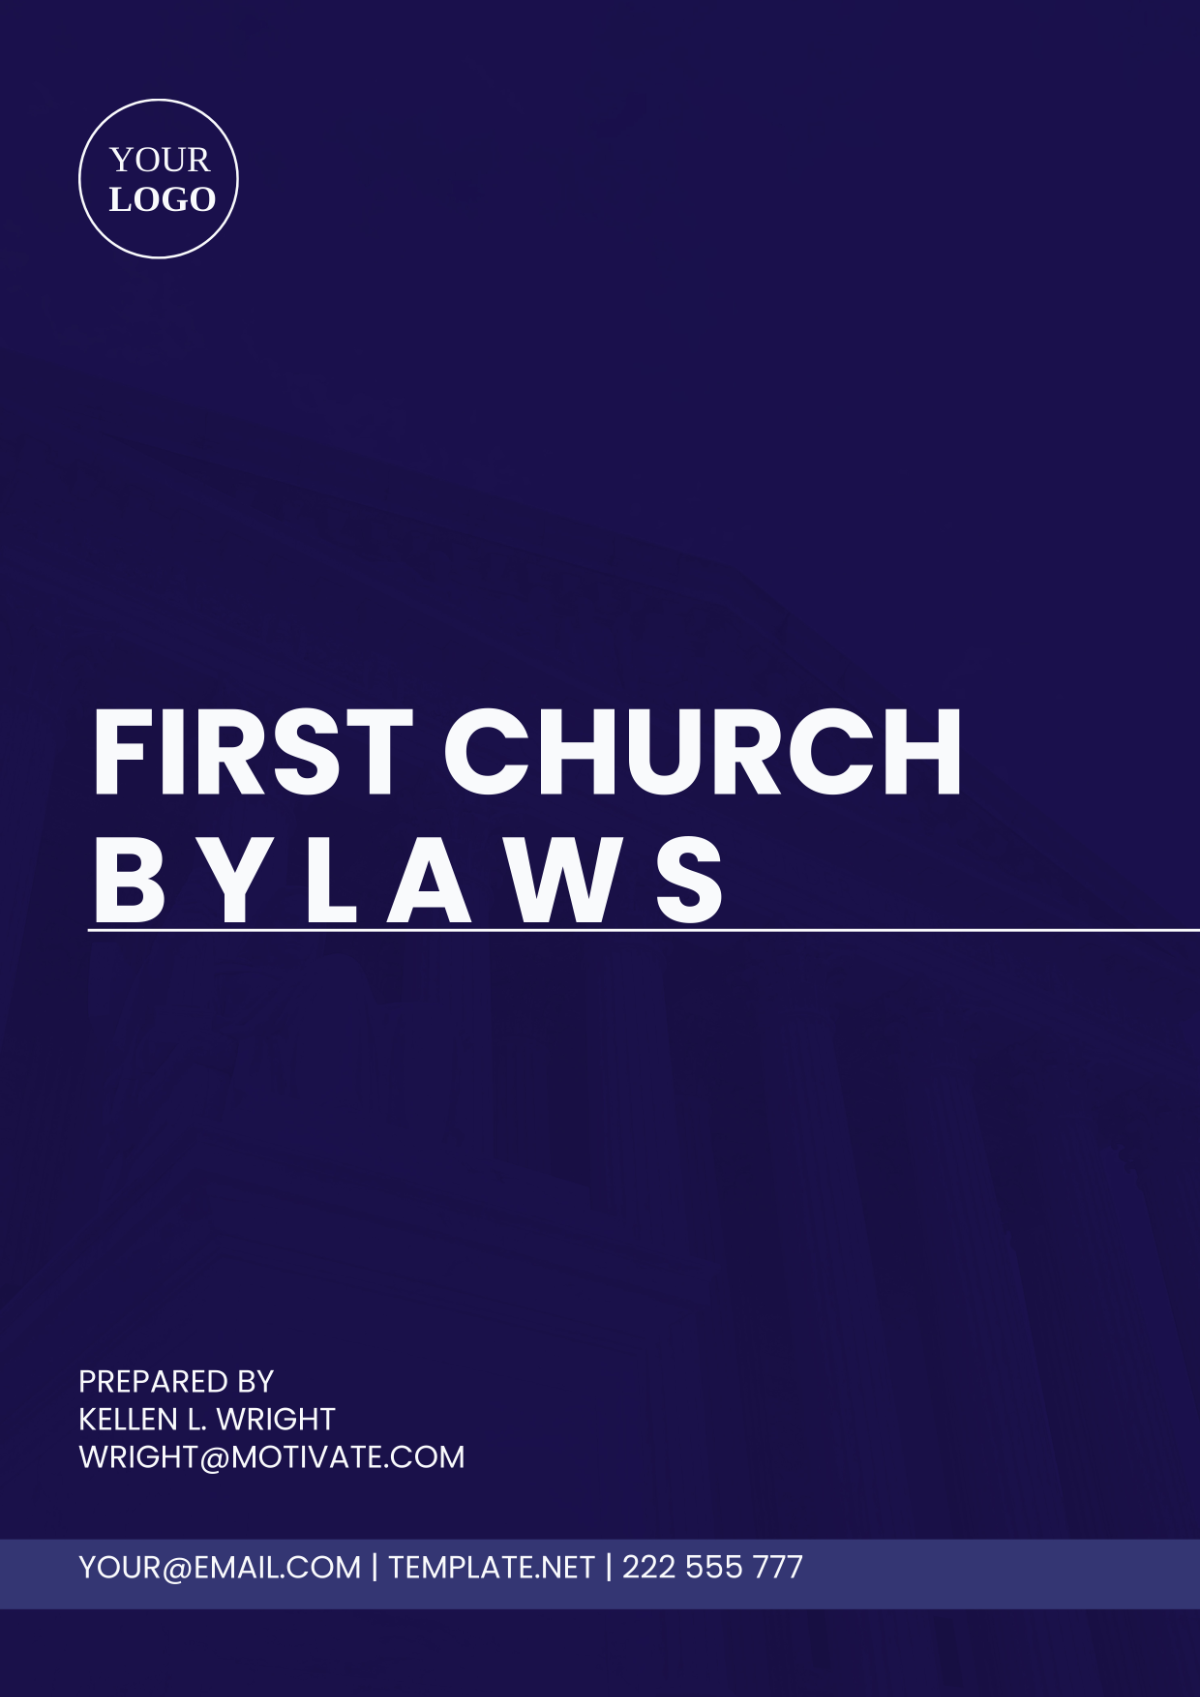 First Church Bylaws Template